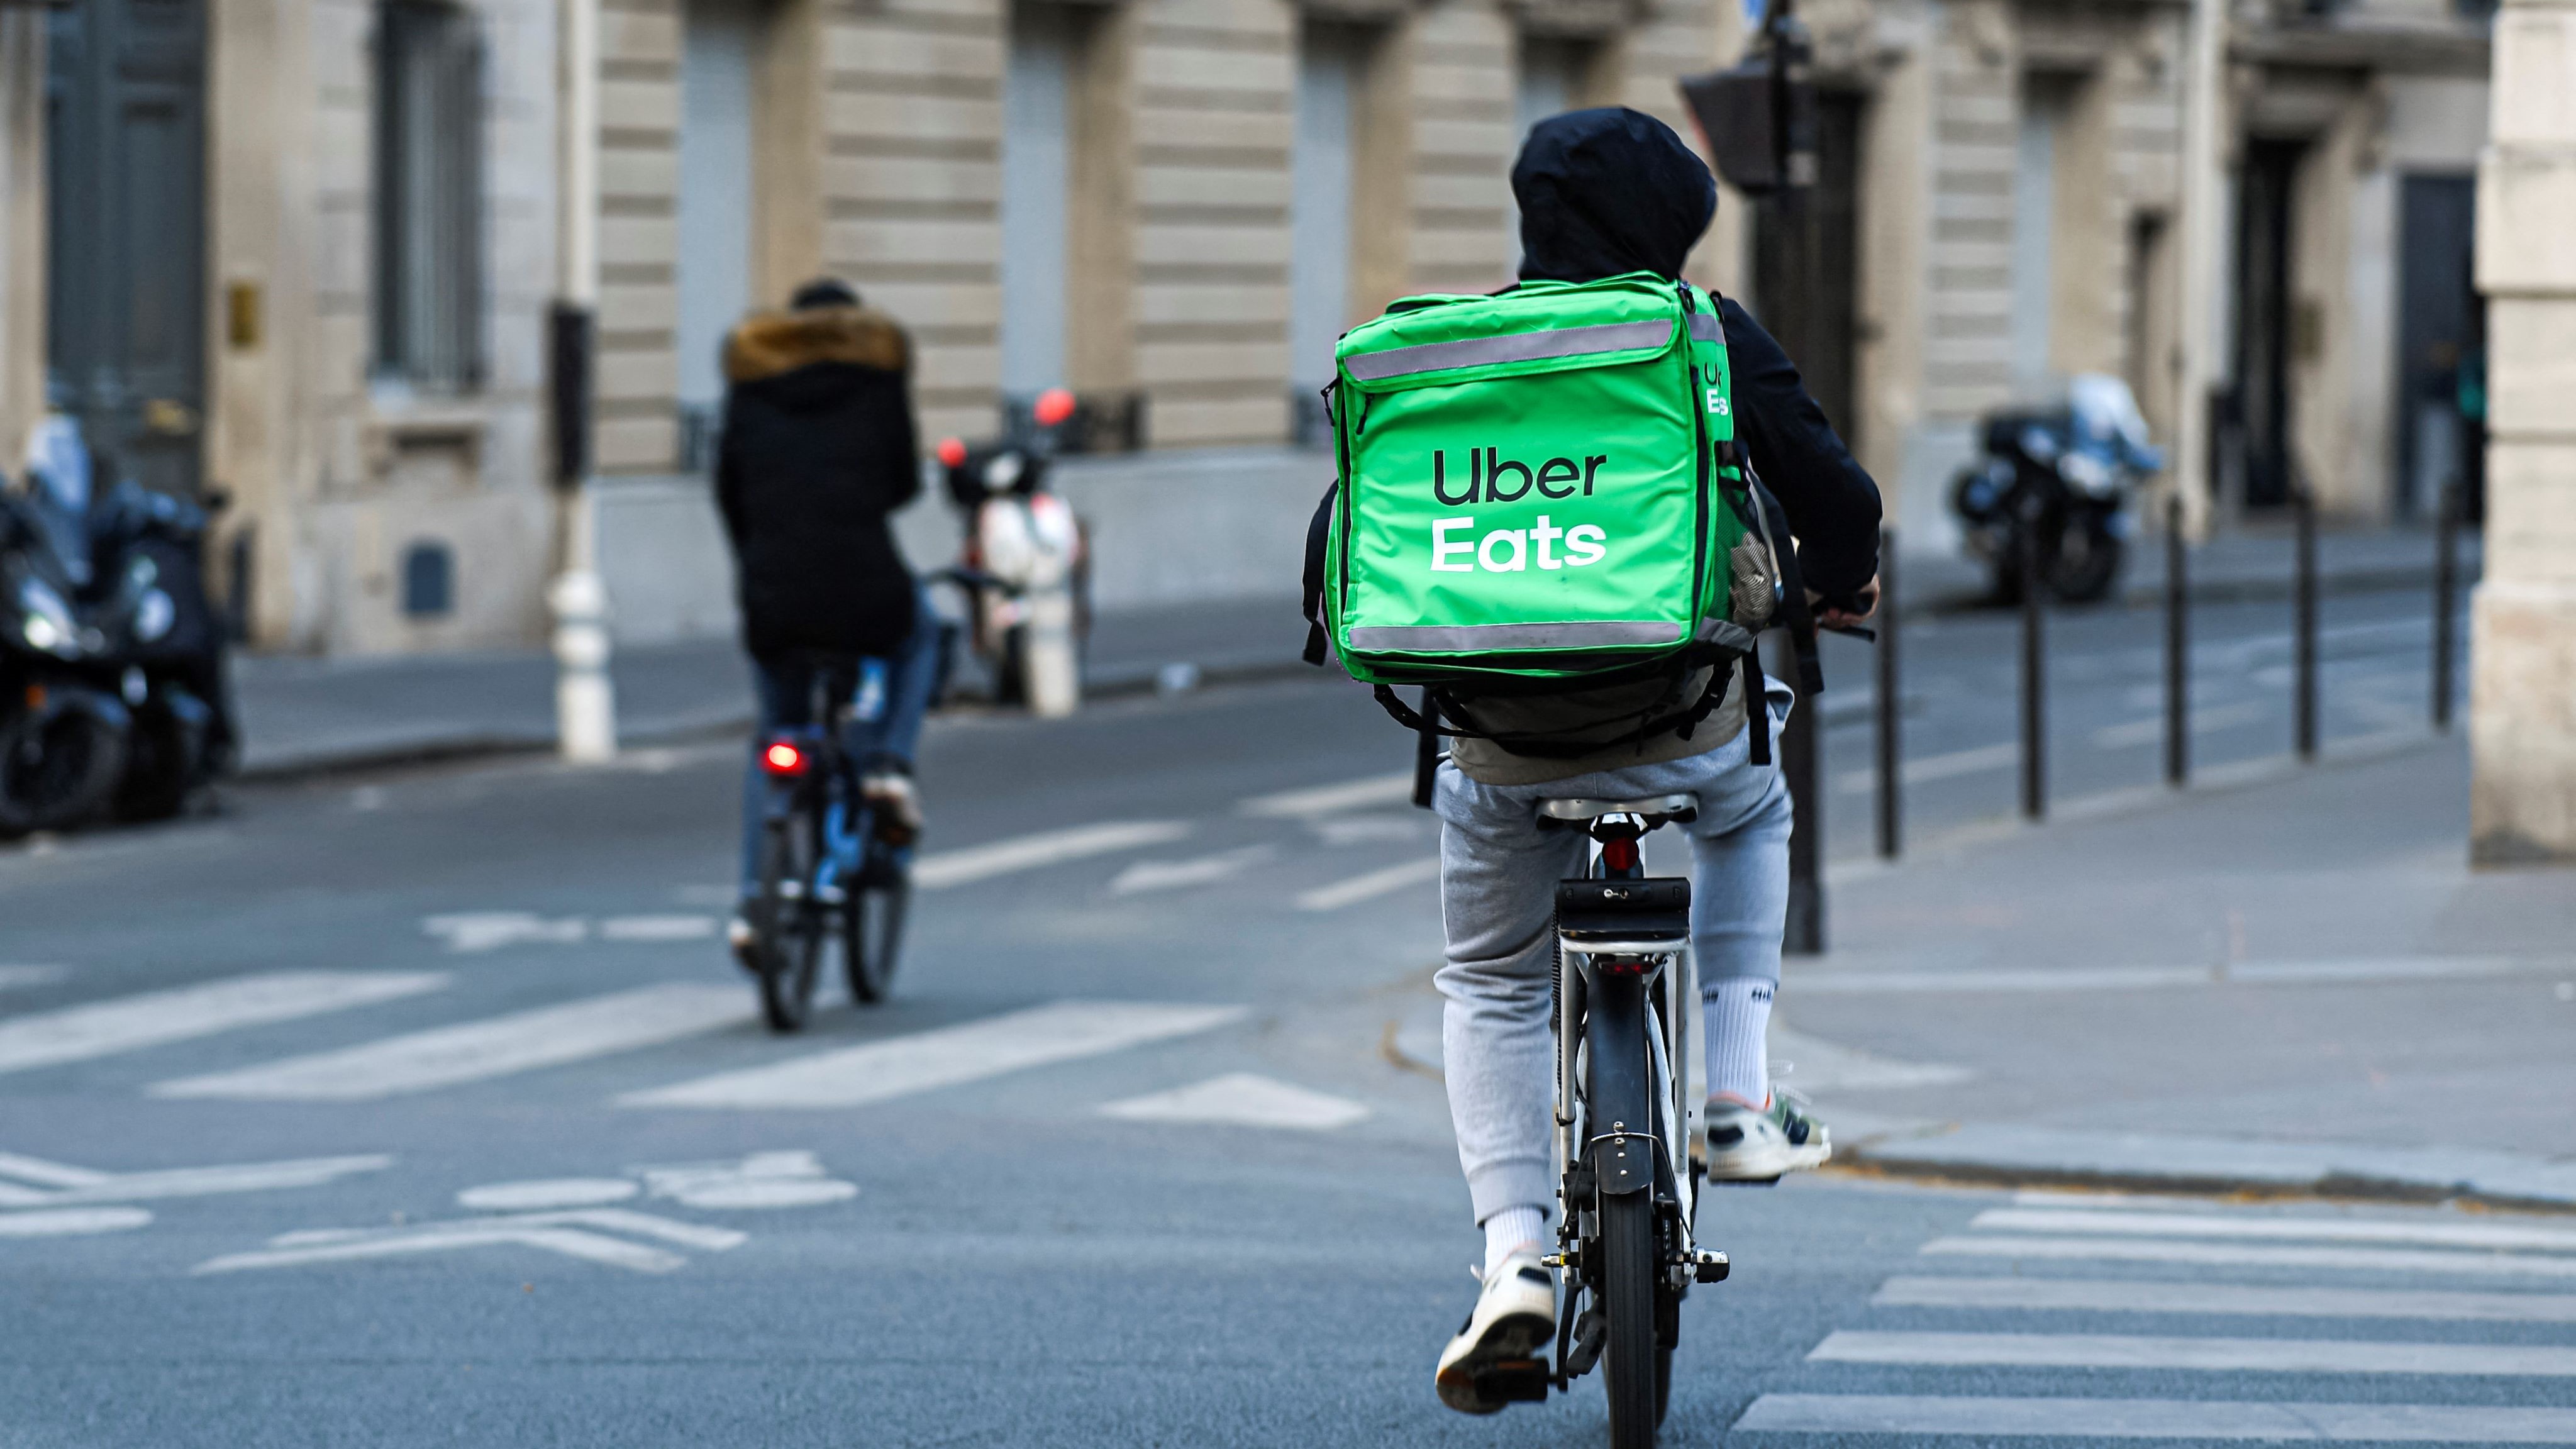 Lobbying Influence Leads to Rejection of EU Gig Economy Regulations